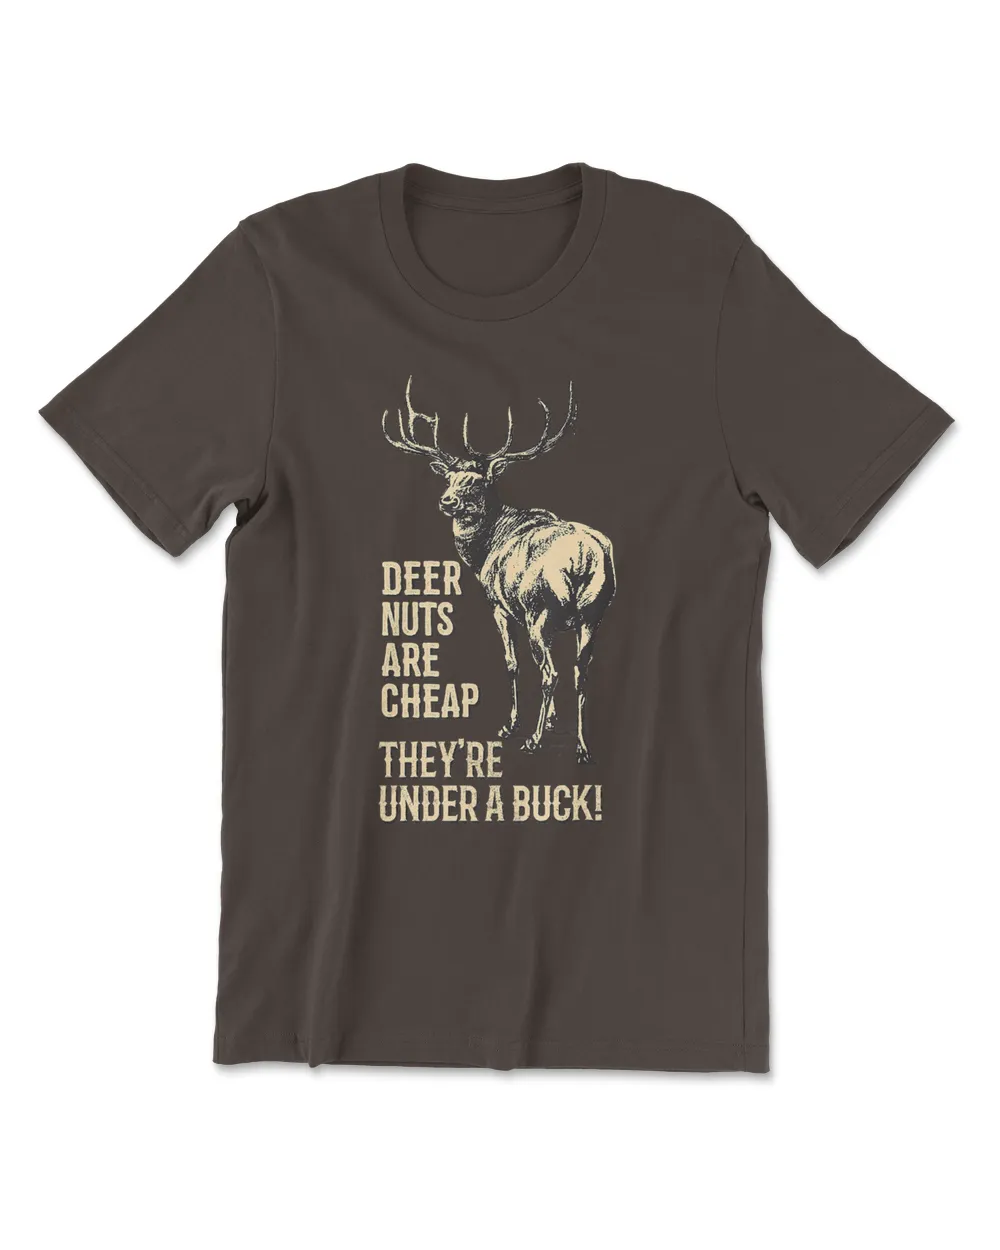 Funny Hunting Shirt Deer Nuts Are Cheap They're Under A Buck